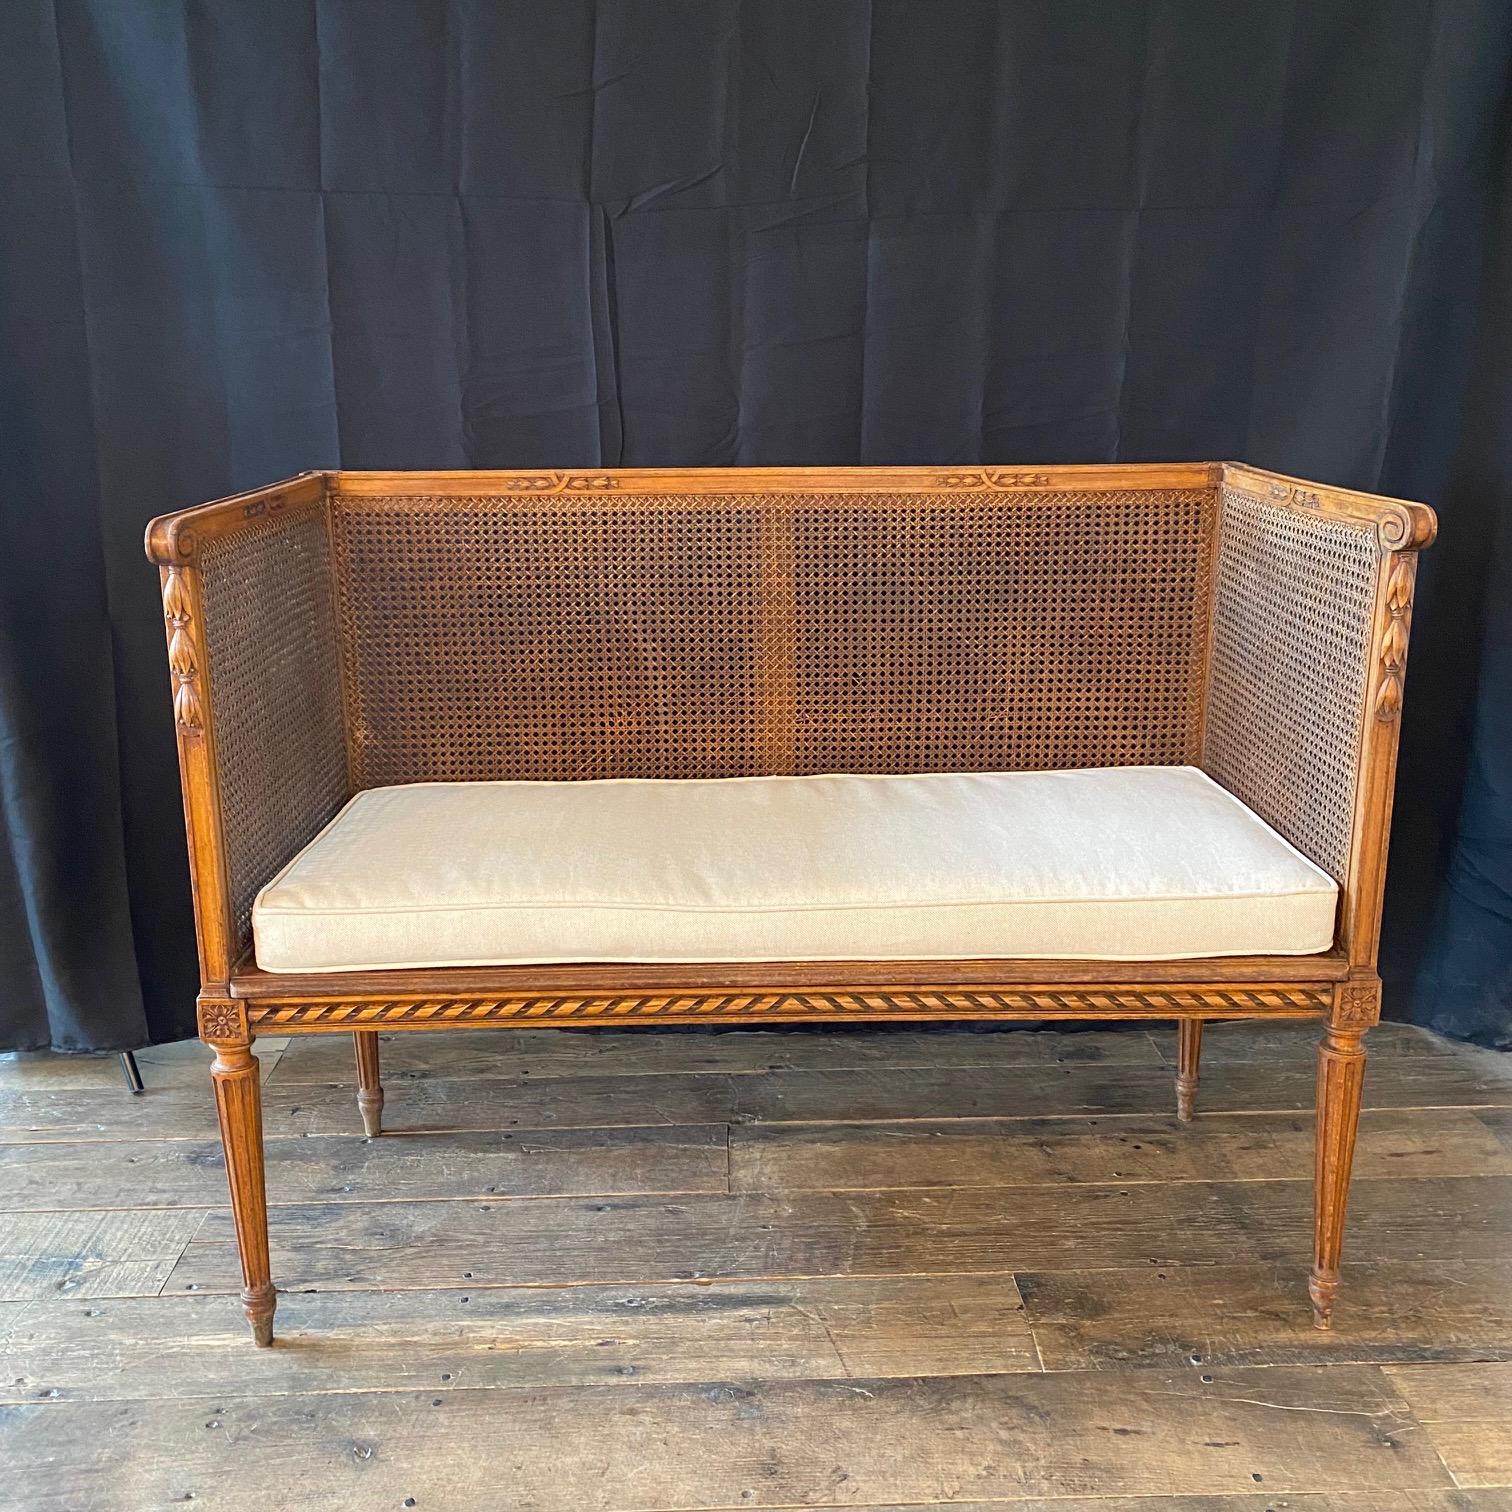 Fantastic, original and rare loveseat made in France in the early 1900s with double caning in the style of Louis XVI. A few minor breaks in the caning on the back (see photos). New cushion in high end British neutral linen/cotton blend. # 6337
seat